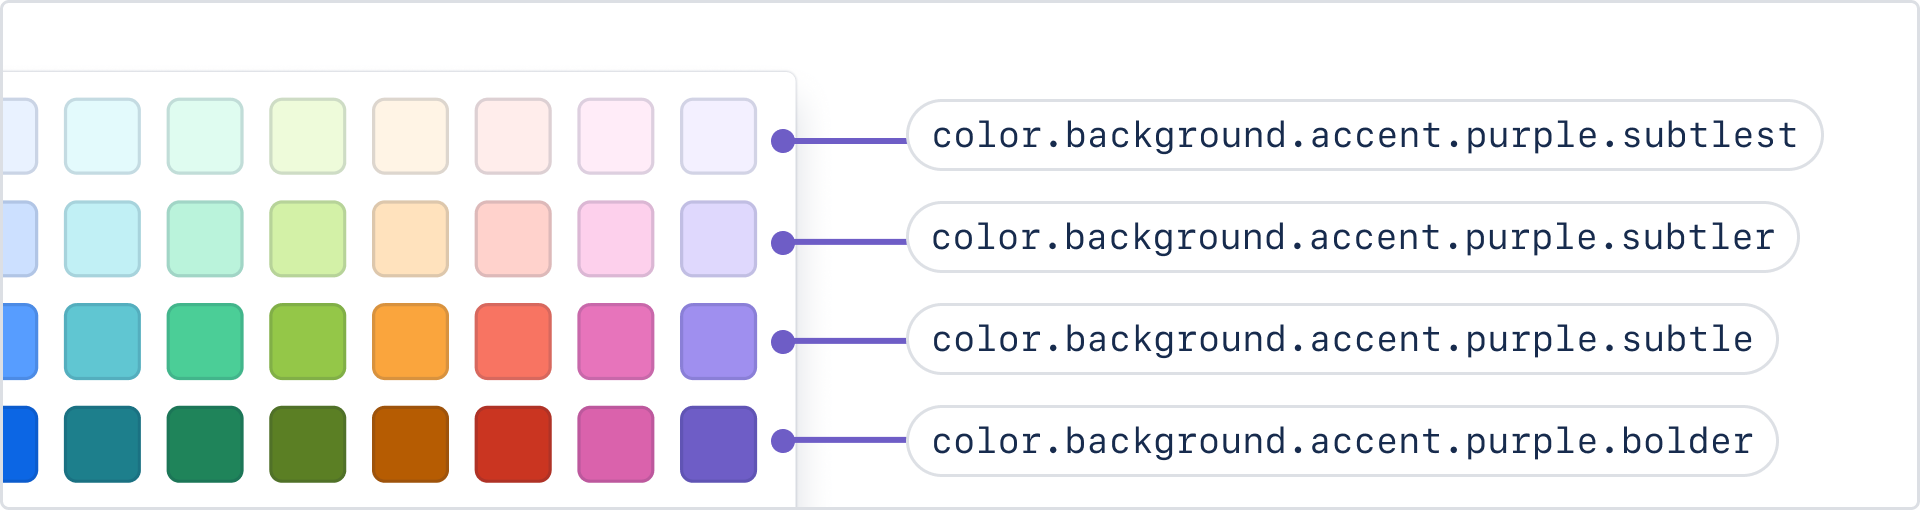 A color picker with four shades per color. There is a label pointing to each shade of purple. From most subtle to boldest, the labels say color.background.accent.purple.subtlest, color.background.accent.purple.subtler, color.background.accent.purple.subtle, and color.background.accent.purple.bold.